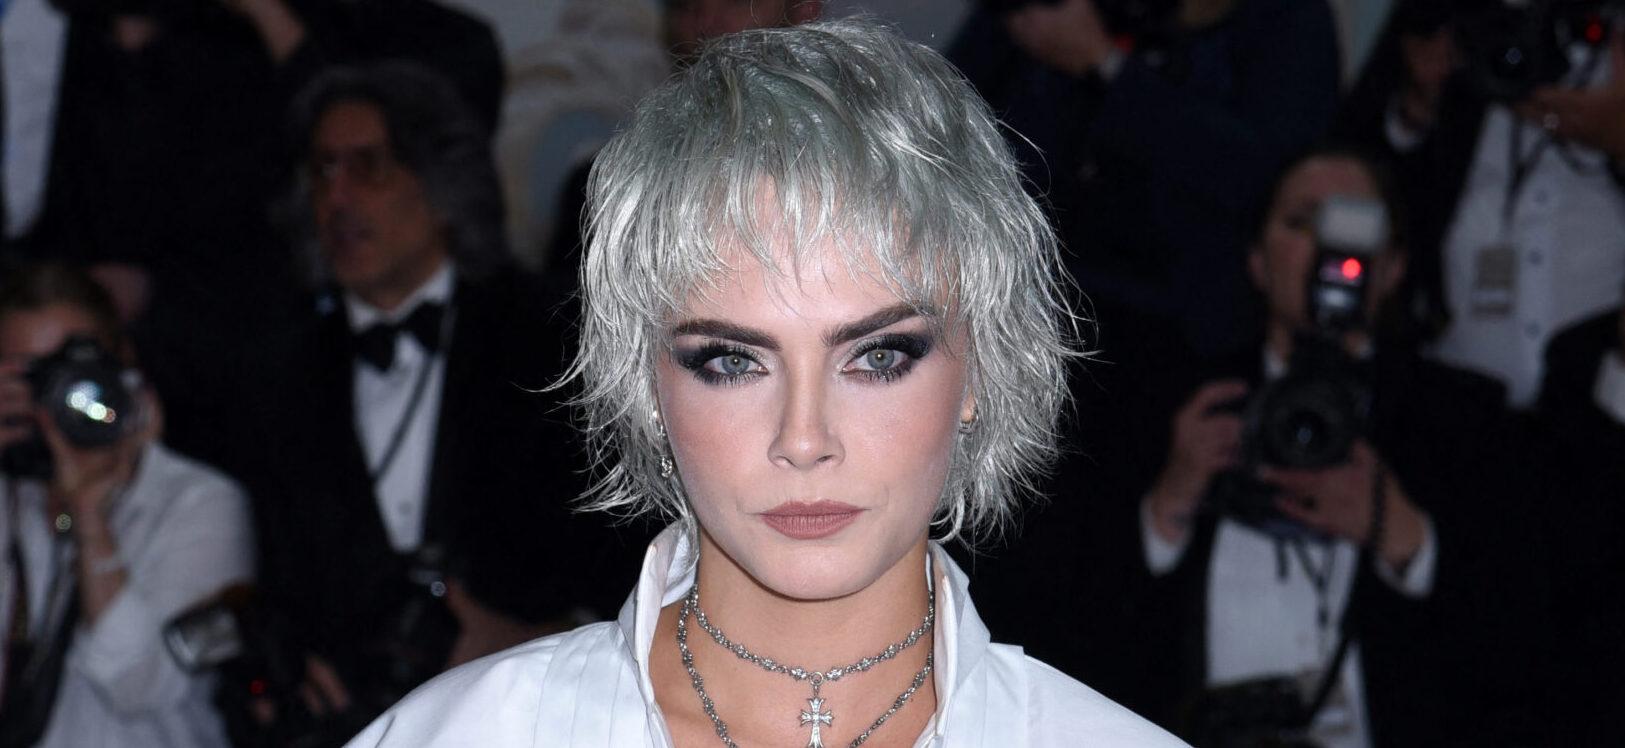 Cara Delevingne’s Los Angeles Home Gutted By Massive Fire, One Person Injured